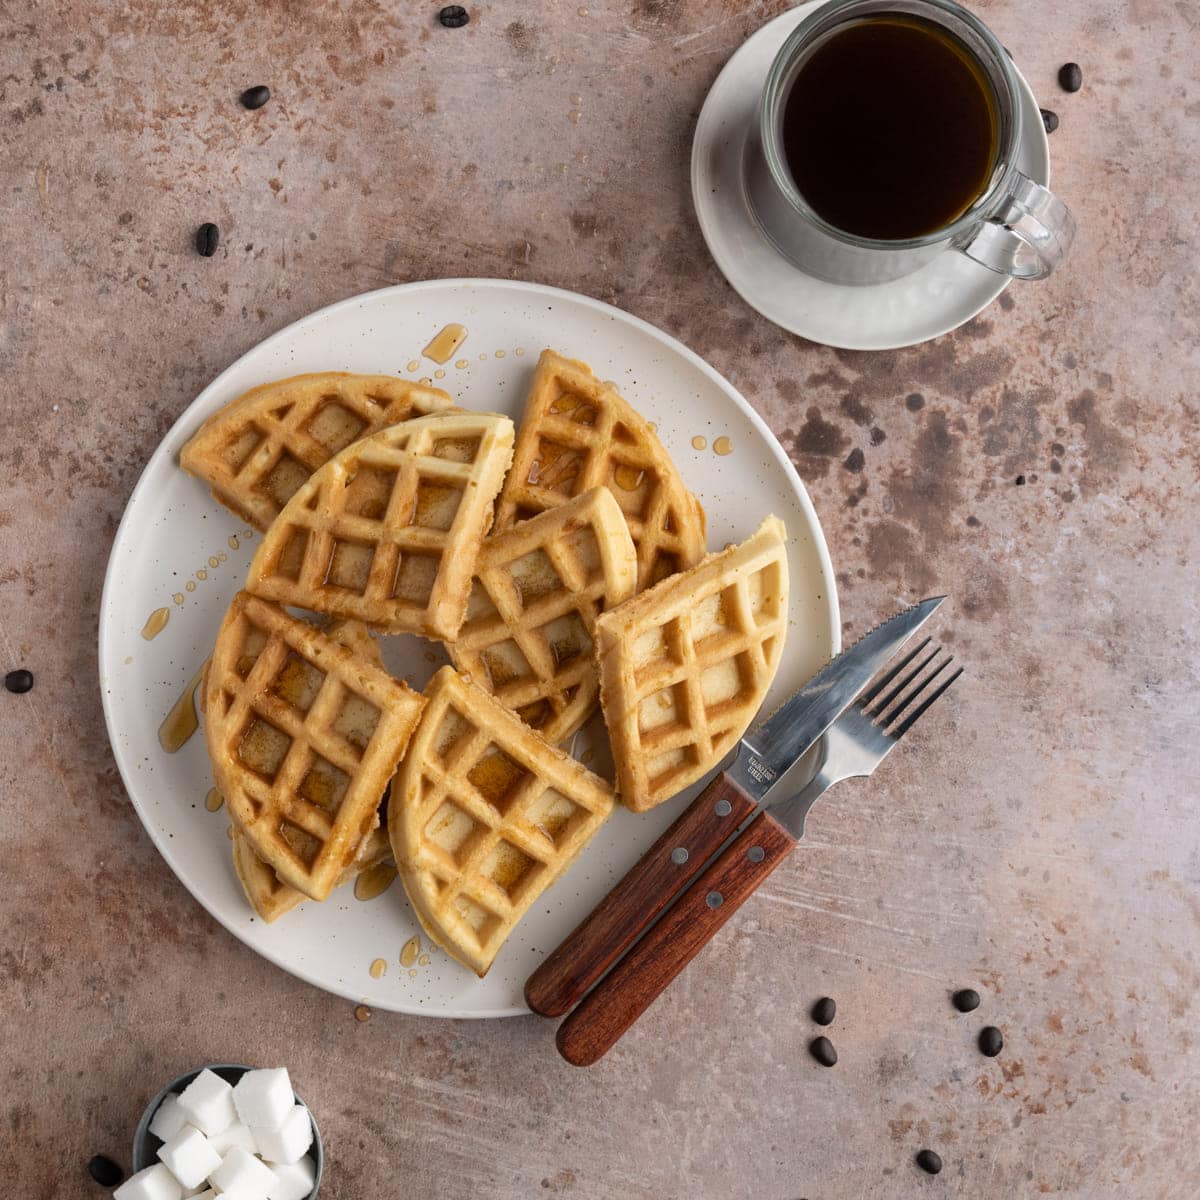 Dairy-free Waffles with Syrup